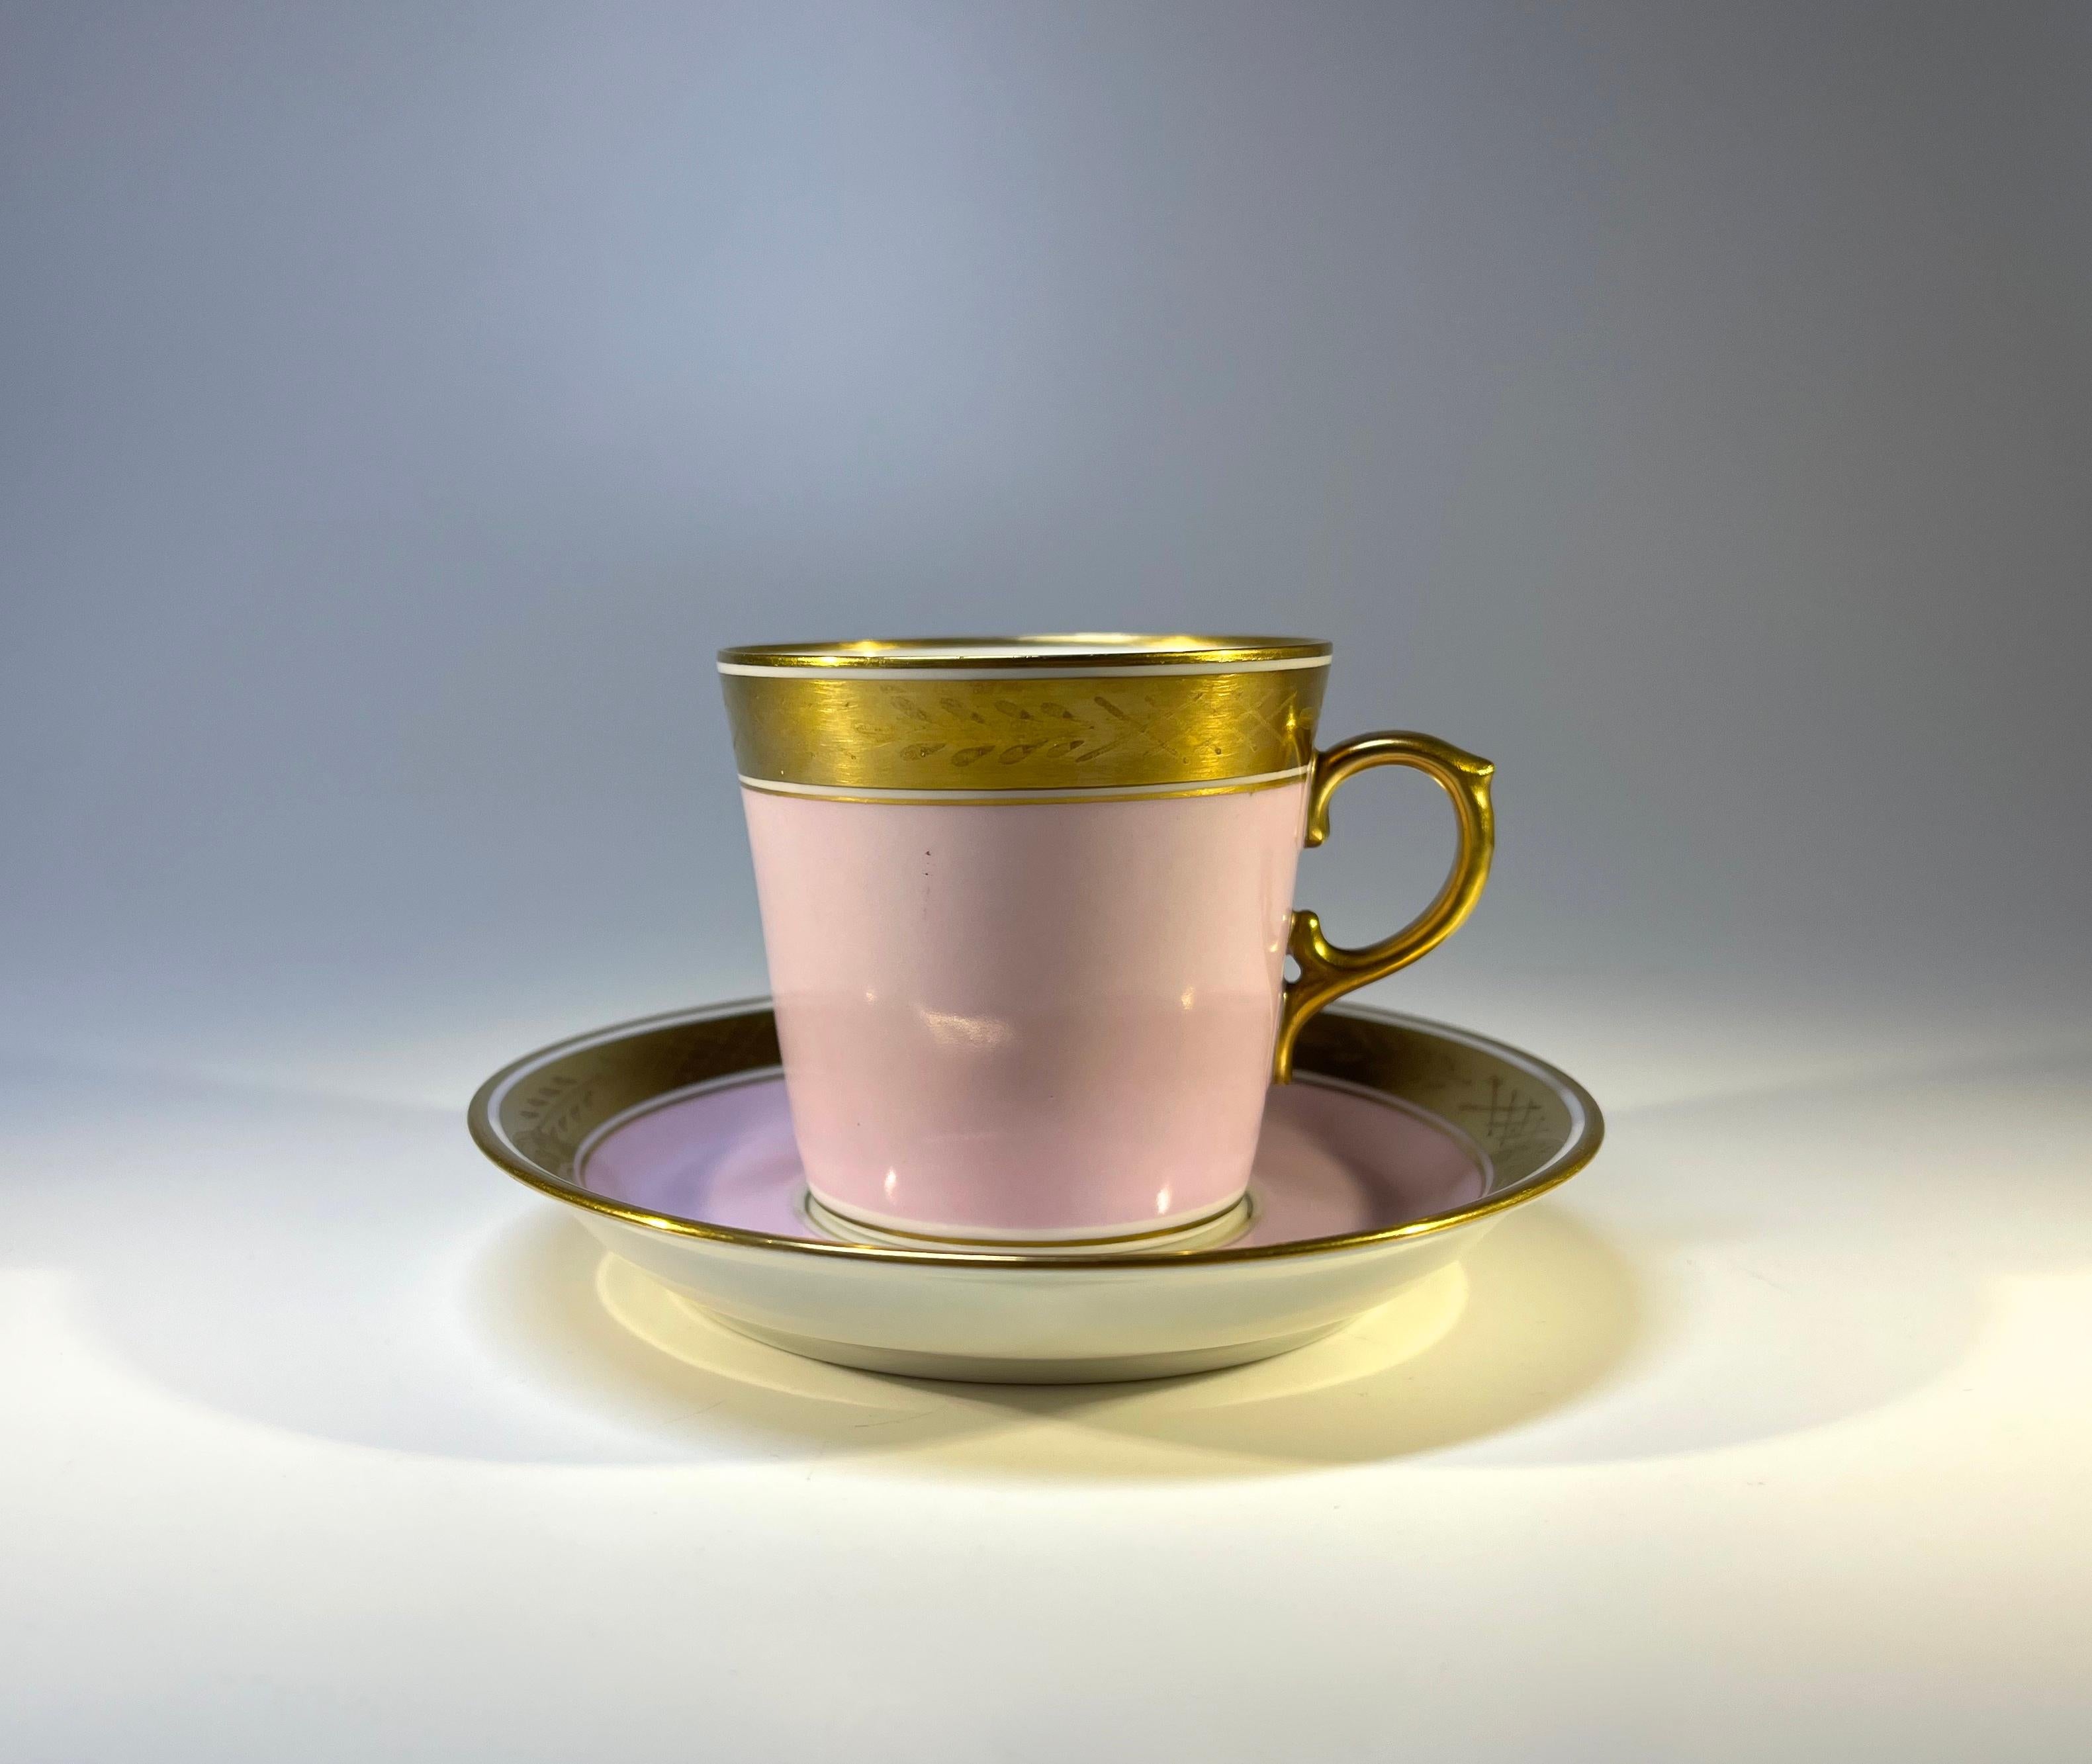 Delightful pair of bone china Royal Copenhagen demitasse cups and saucers
One a soft pale pink, the other crushed raspberry. Each decorated with broad gilded bands
Circa 1951
All pieces signed and numbered 9093
Height 2.15 inch, Diameter 2.30